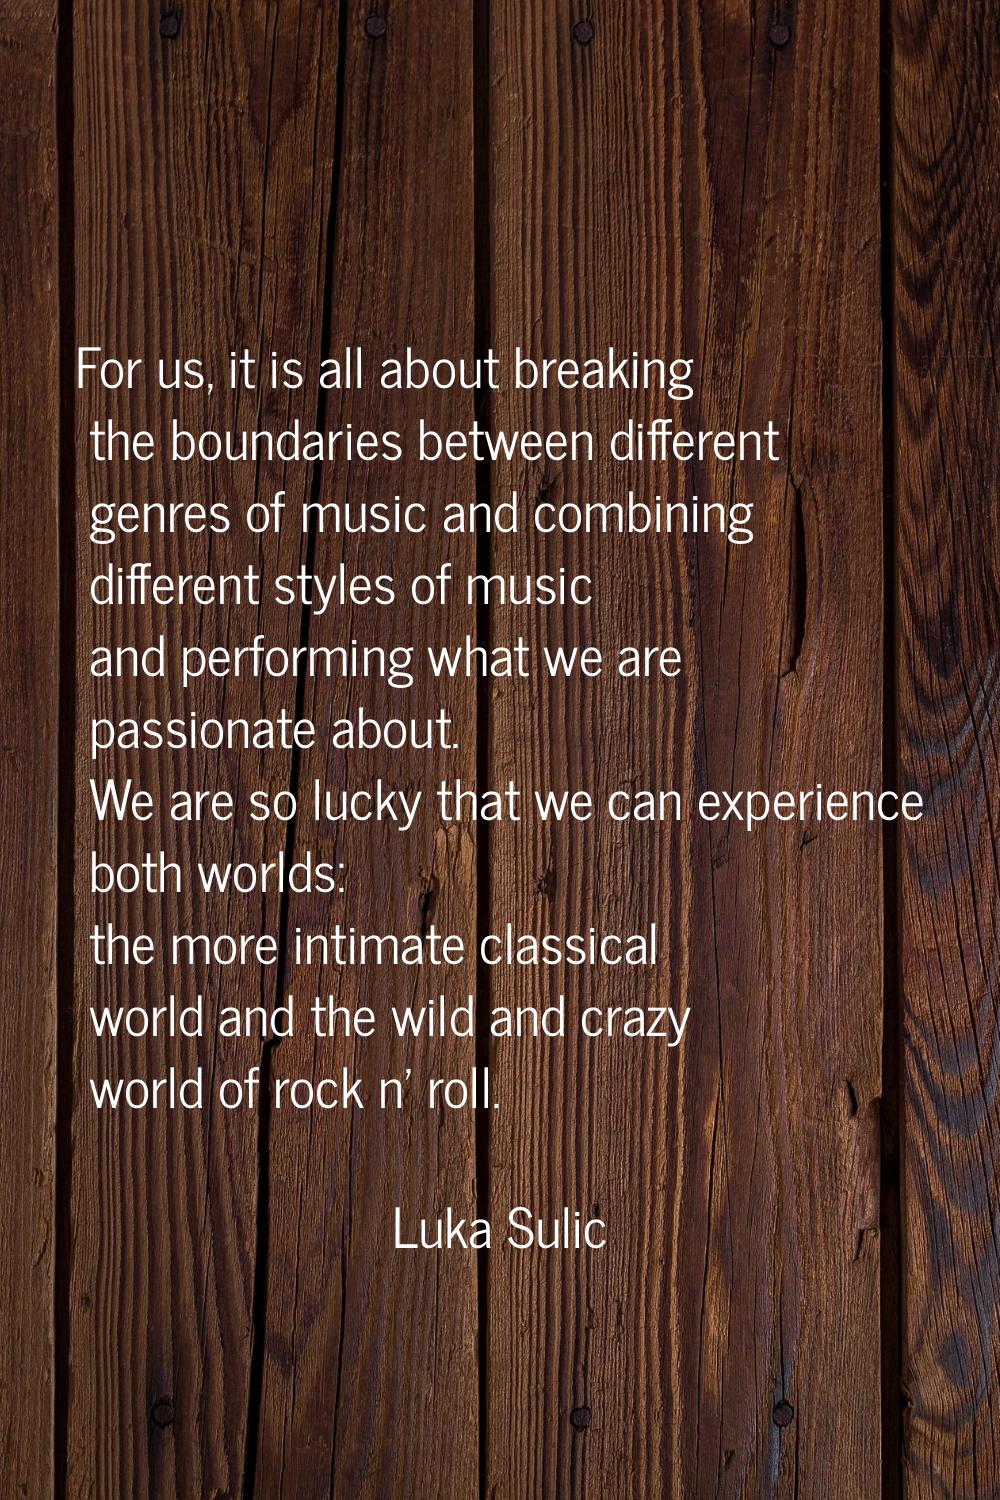 For us, it is all about breaking the boundaries between different genres of music and combining dif